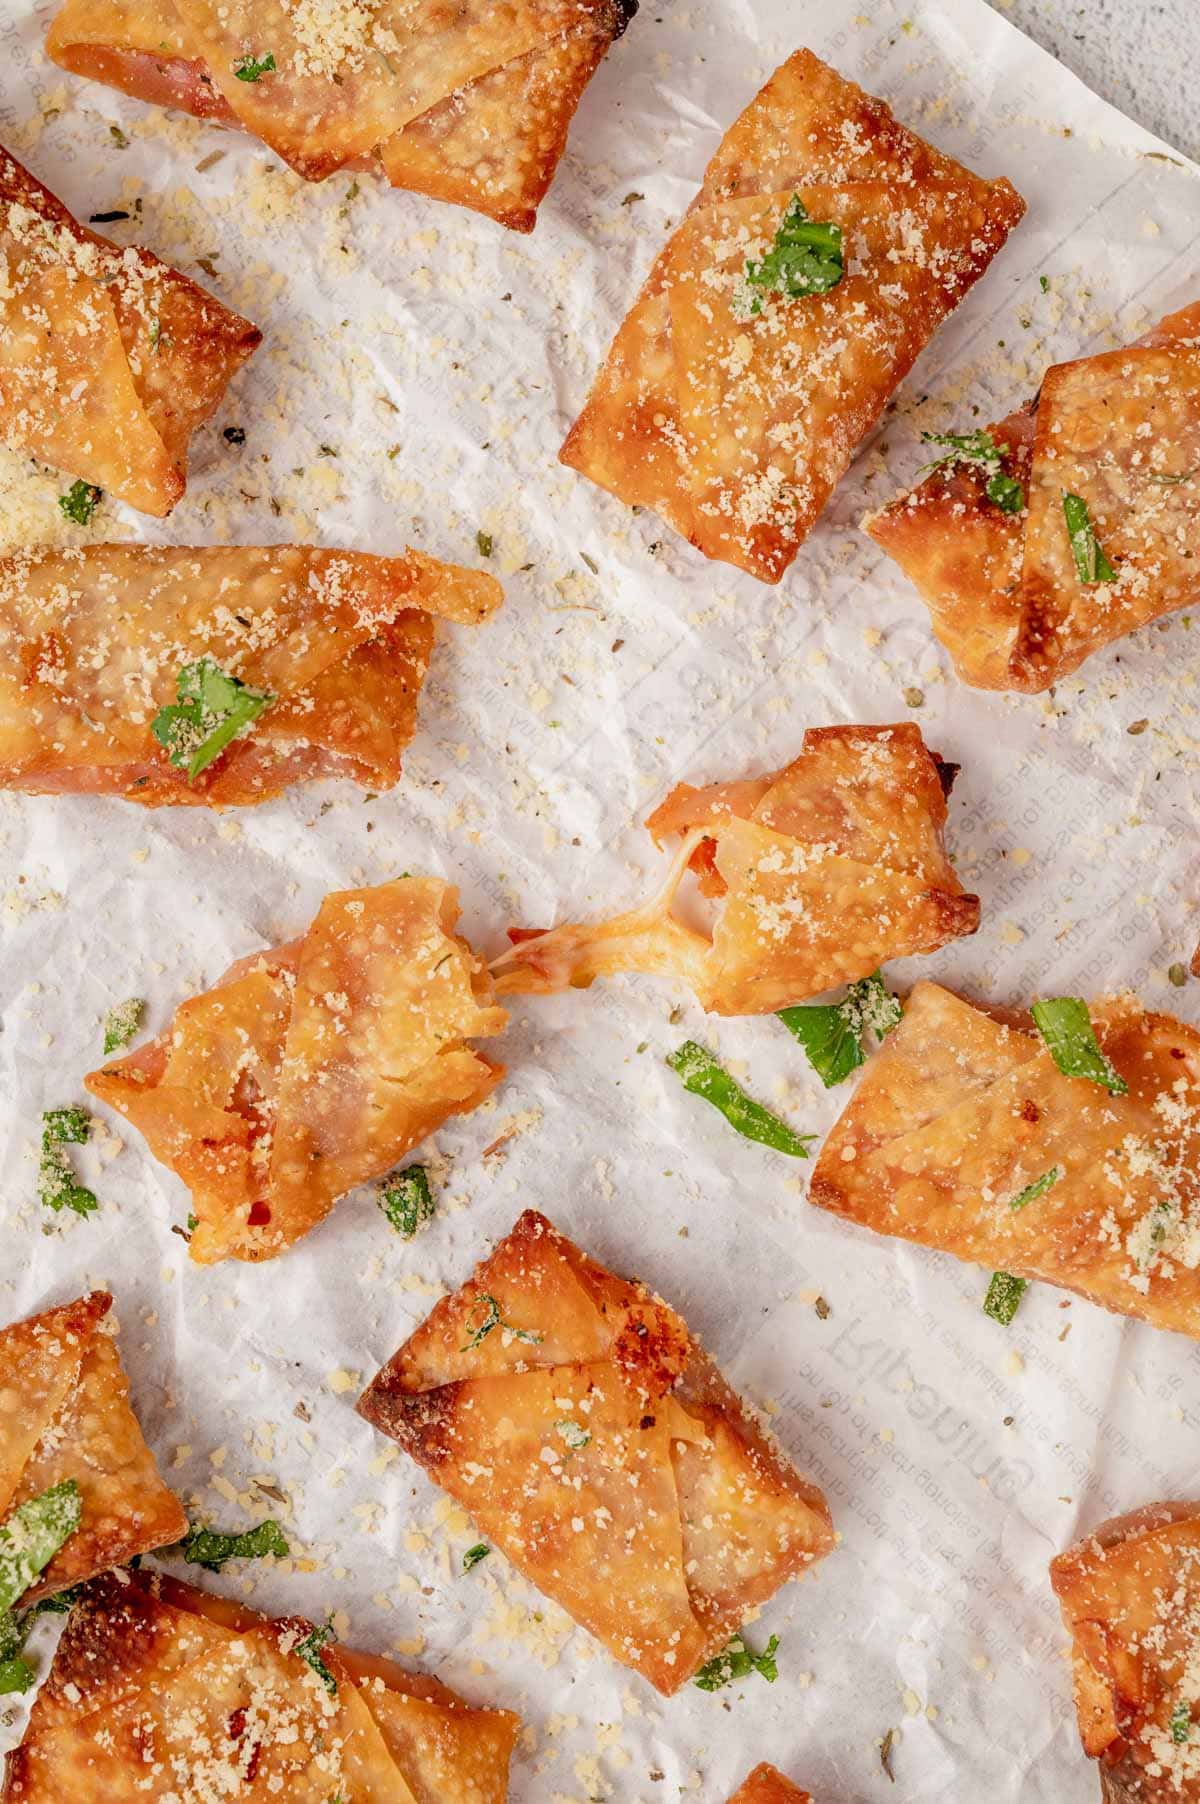 Homemade pizza rolls on a white parchment paper.